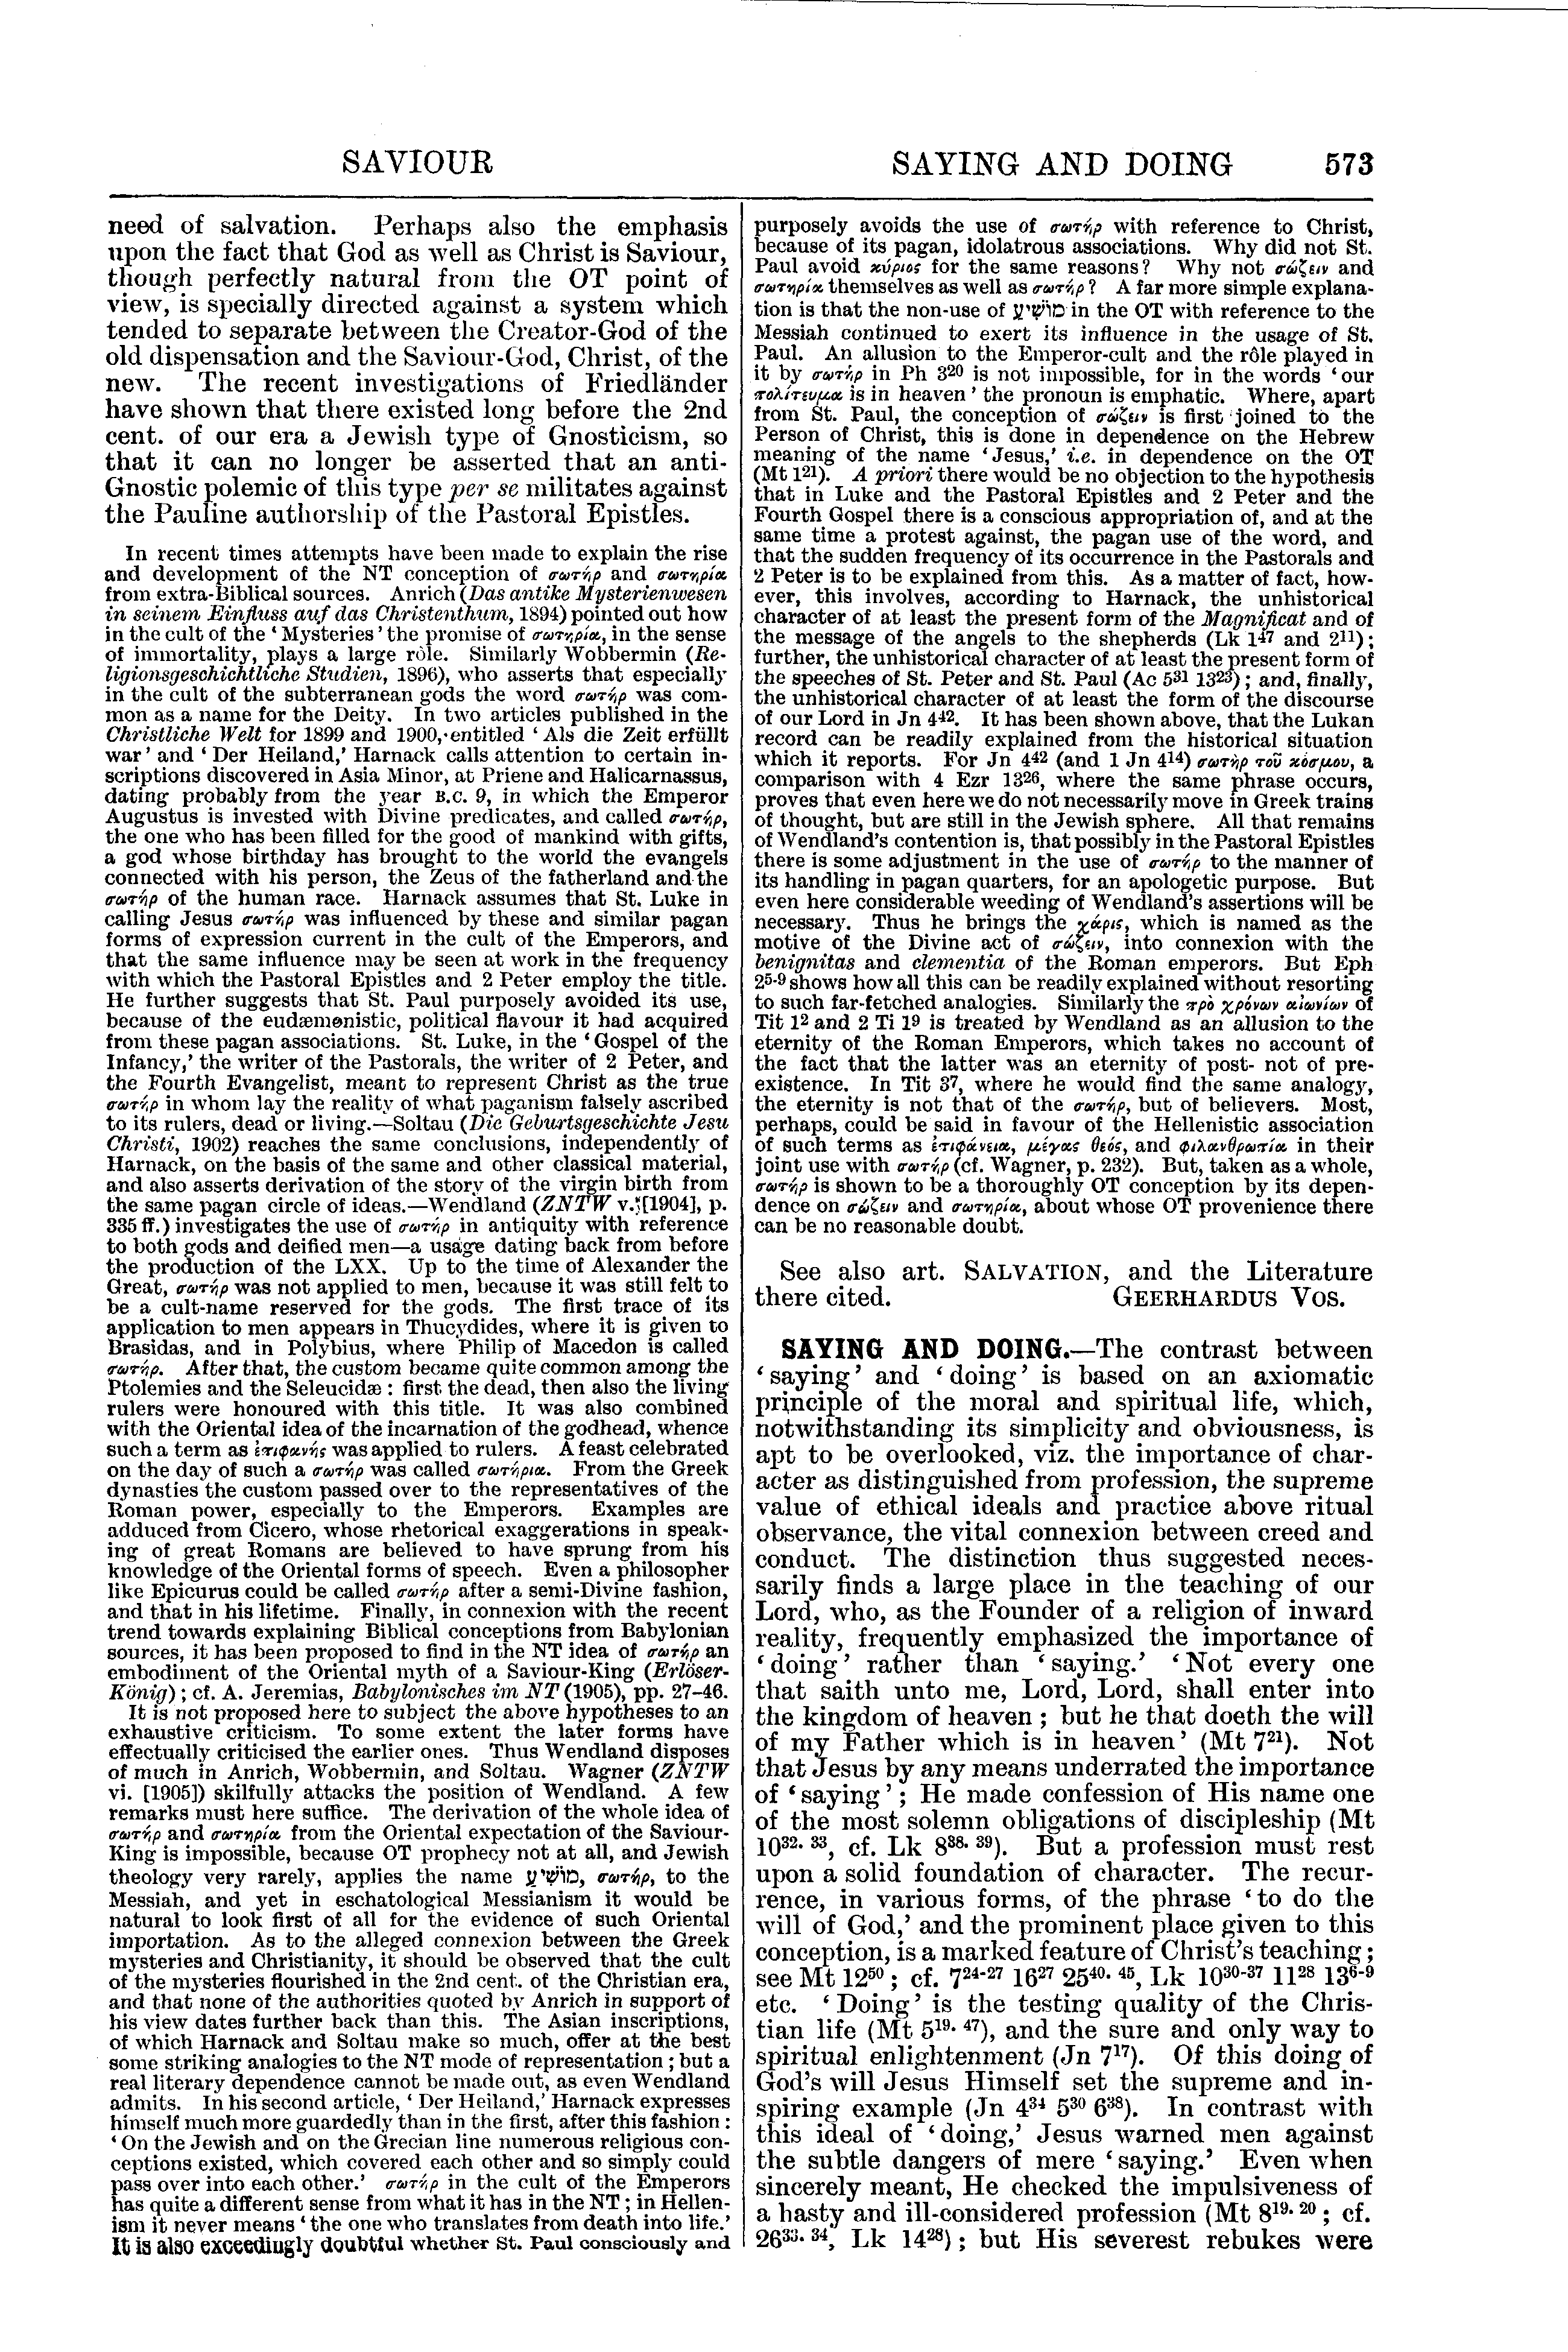 Image of page 573